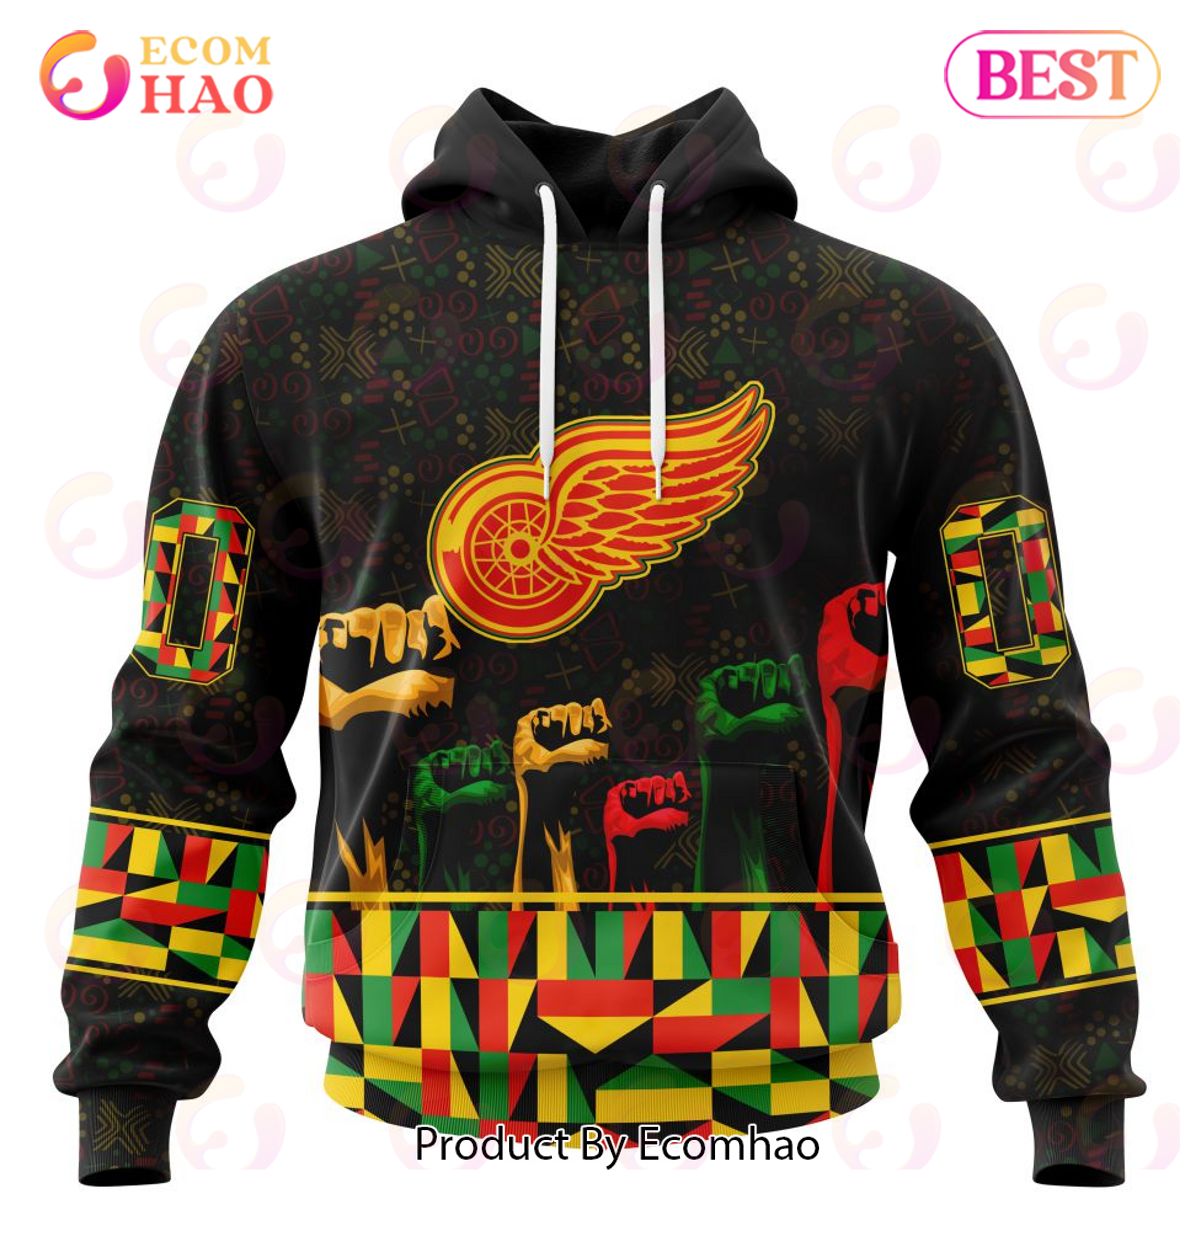 NHL Detroit Red Wings Special Design Celebrate Black History Month 3D Hoodie